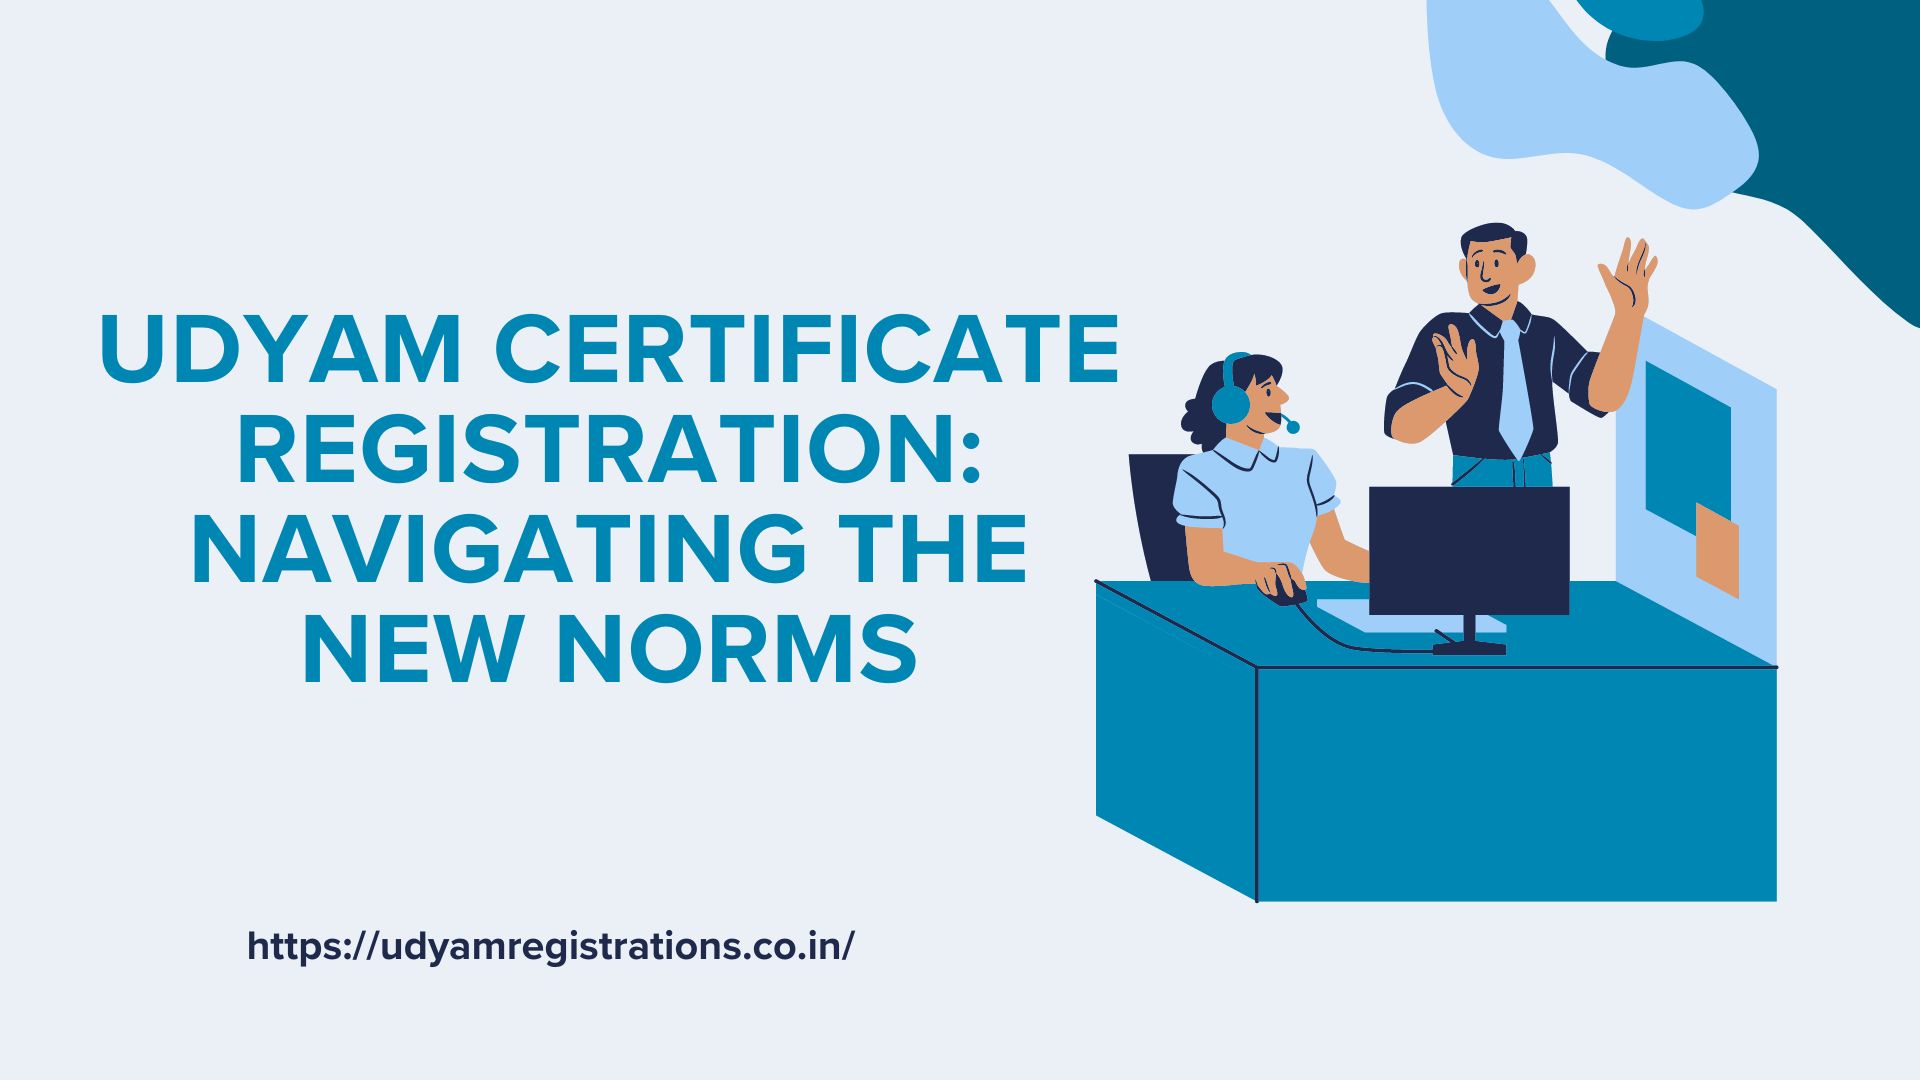 Udyam Certificate Registration: Navigating the New Norms